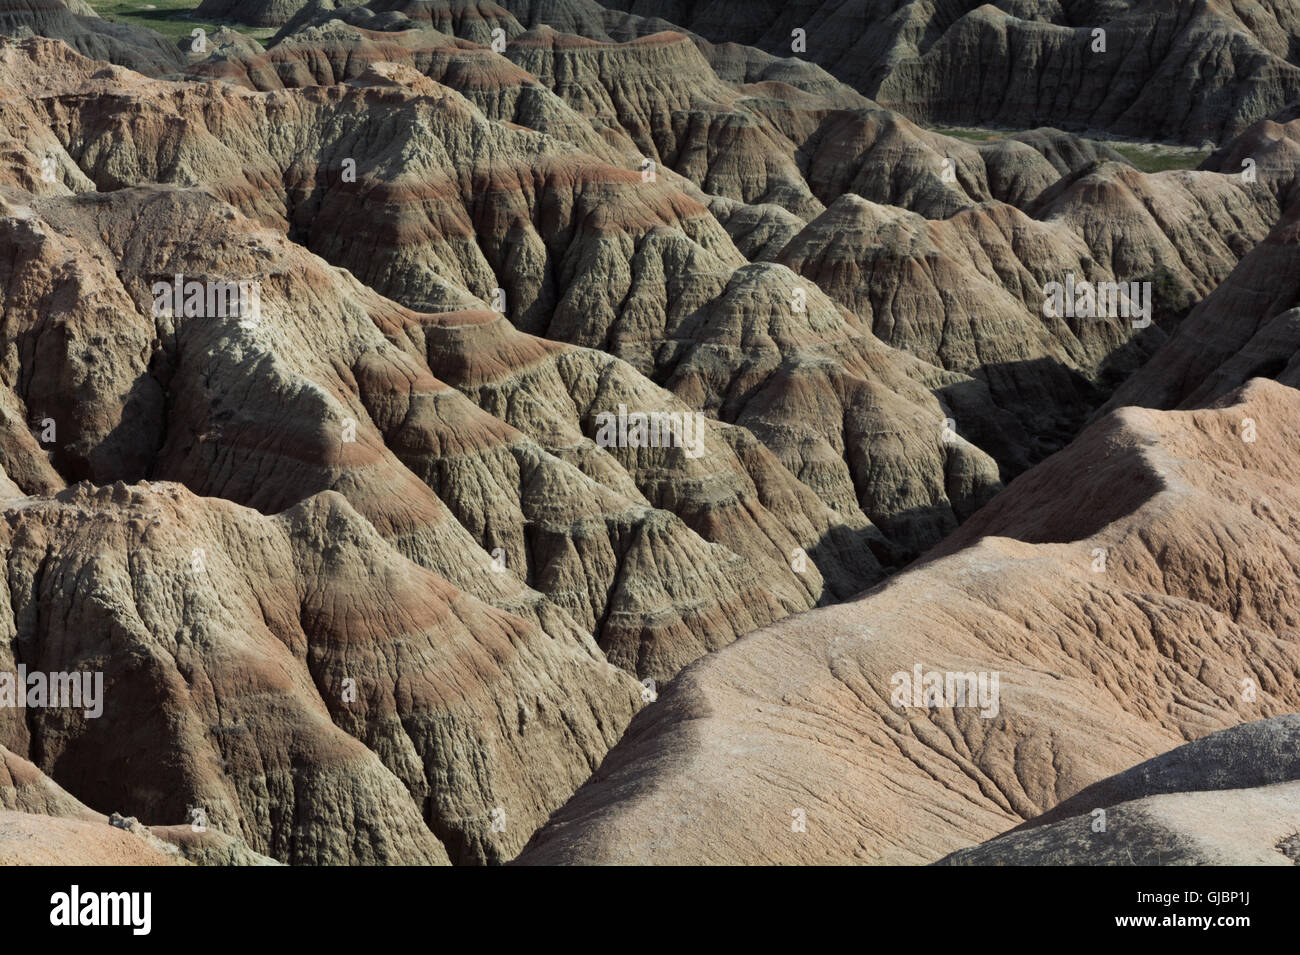 Erosion has created numerous small ravines and valleys out of the sandstone of the Badlands. Stock Photo